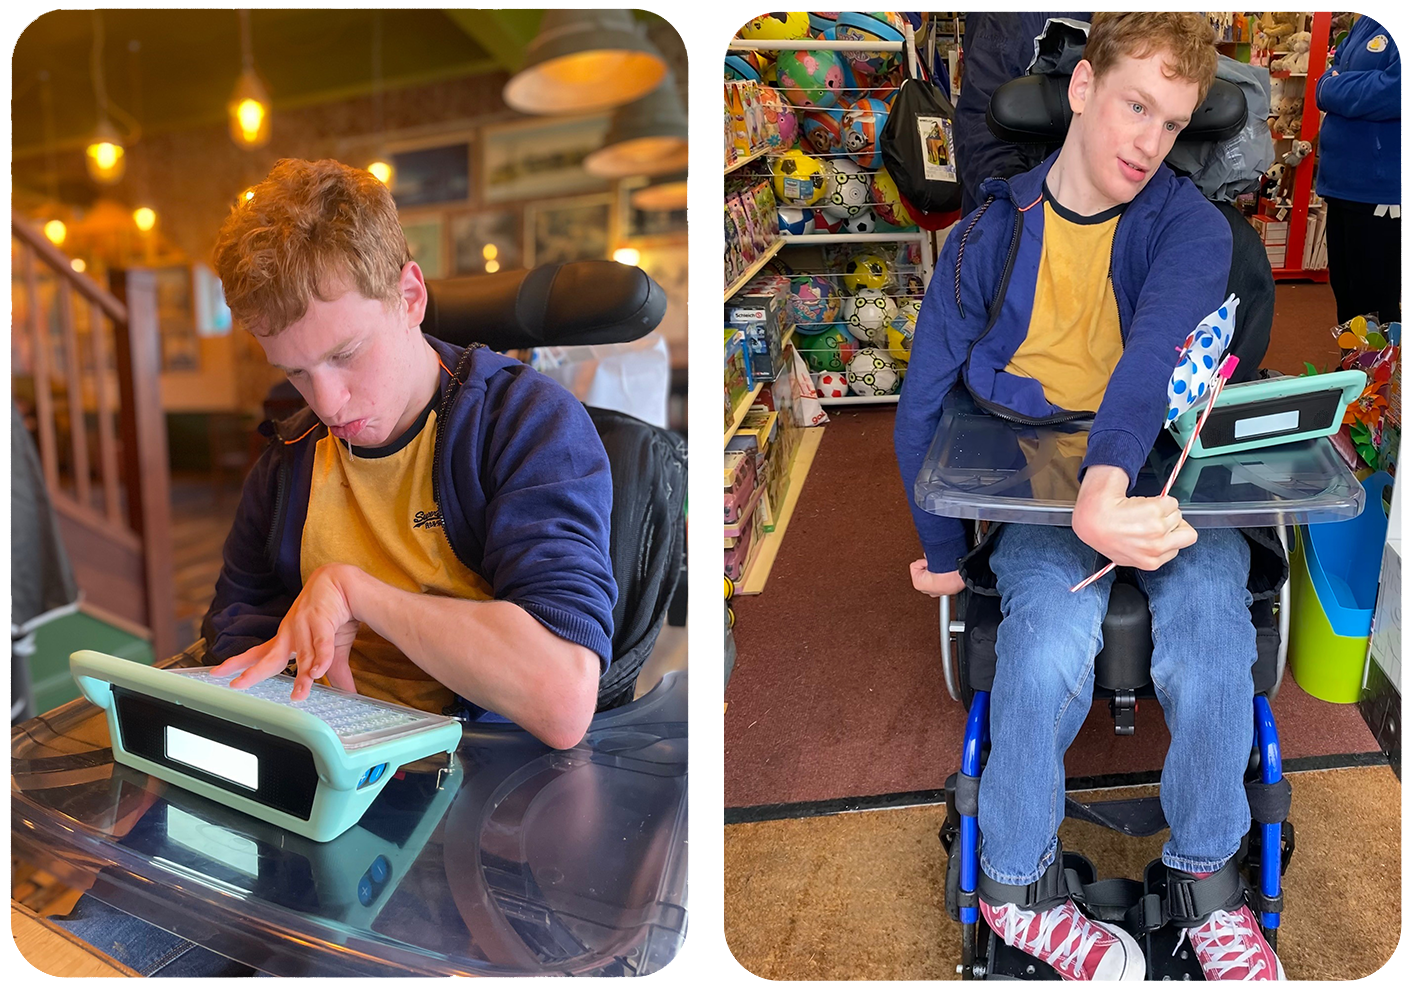 Joe uses his Grid Pad 10s device in a cafe. It has a green tough cover and you can see the second screen.